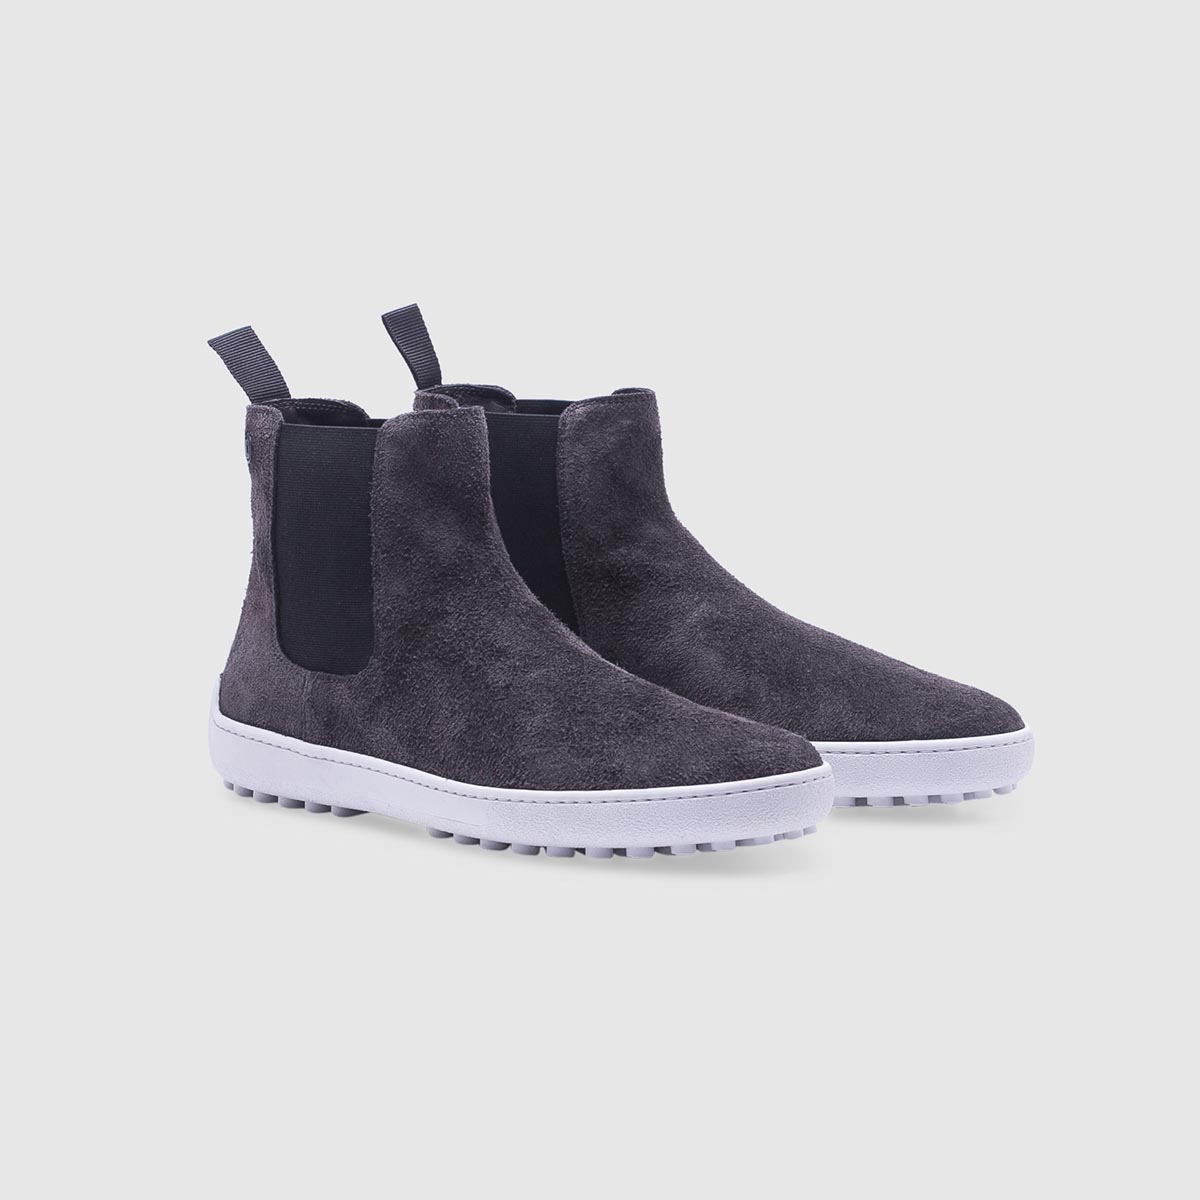 Grey ankle boots in suede Calò on sale 2022 2